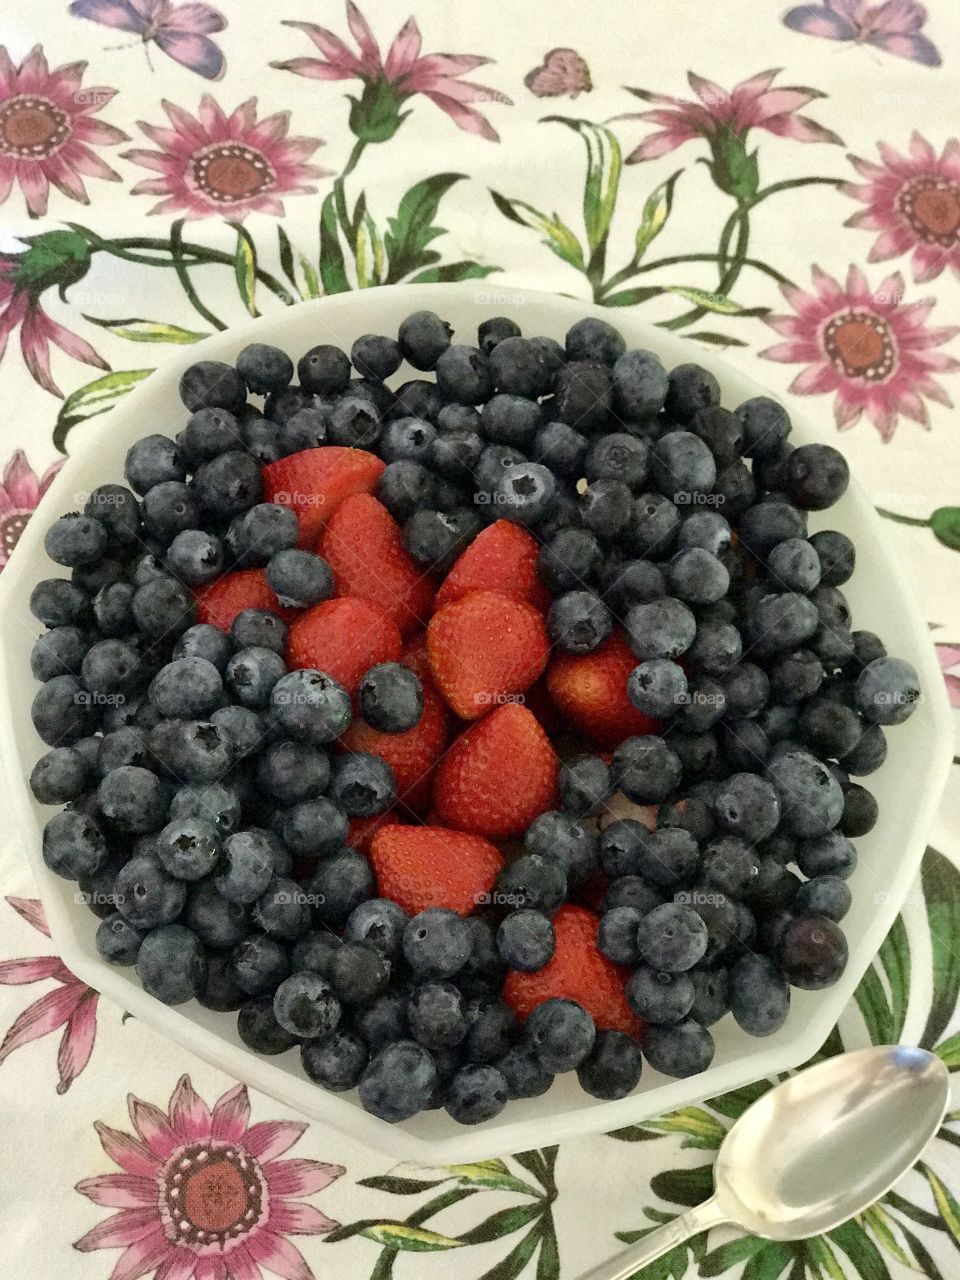 Big fruit bowl of fresh strawberries and blueberries on pretty tablecloth 